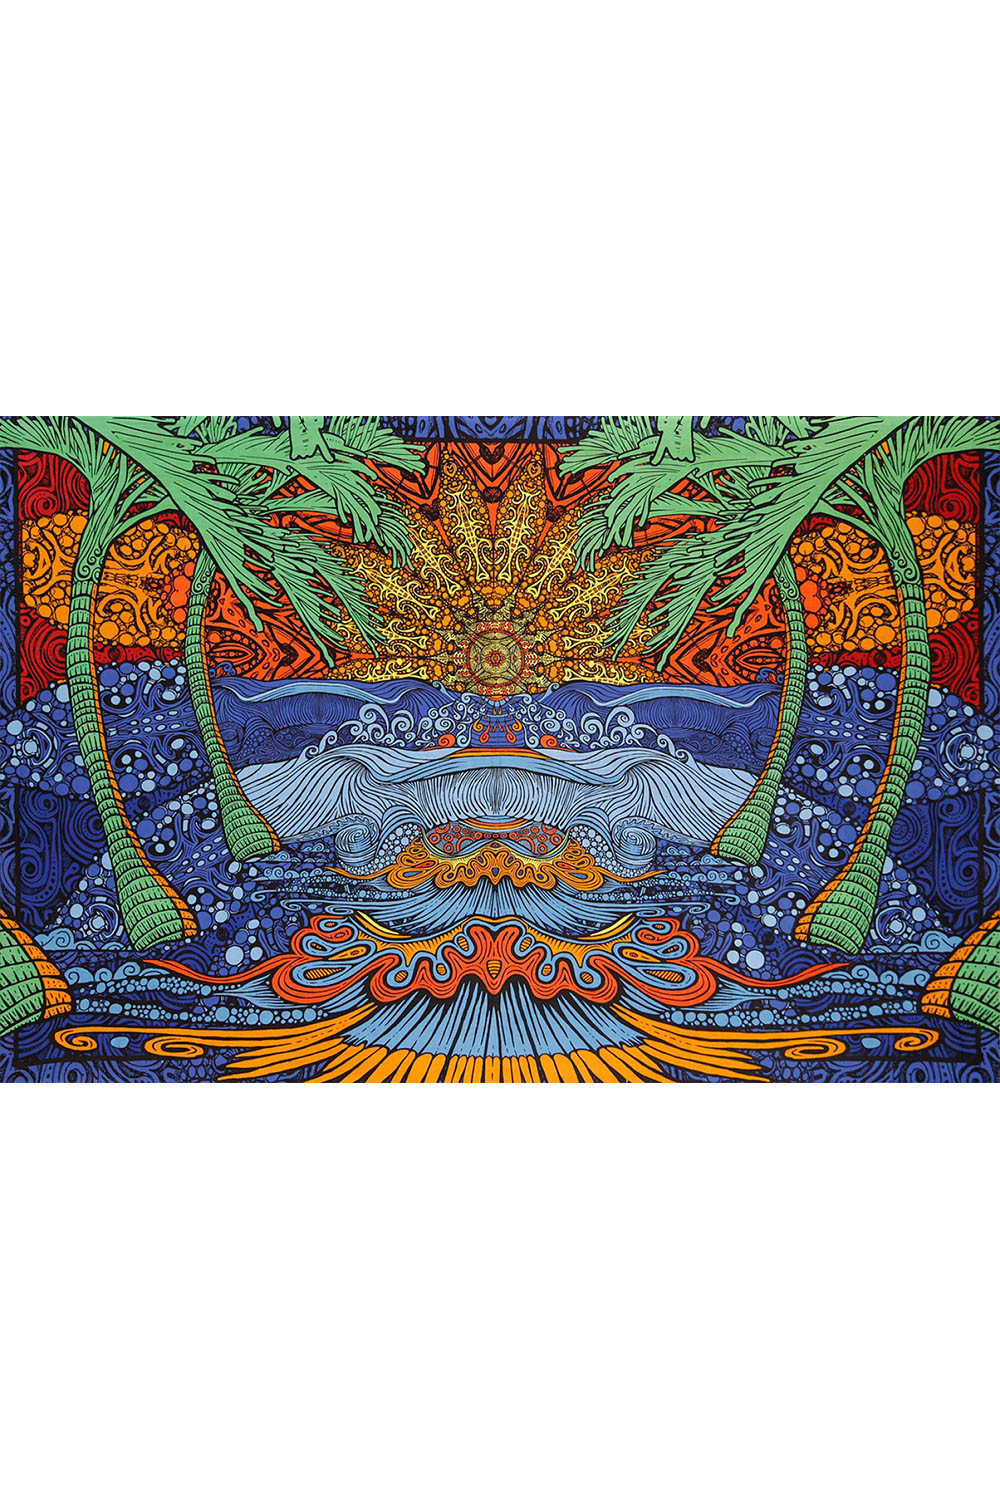 3D Epic Surf Tapestry 60x90 - Art by Chris Pinkerton 